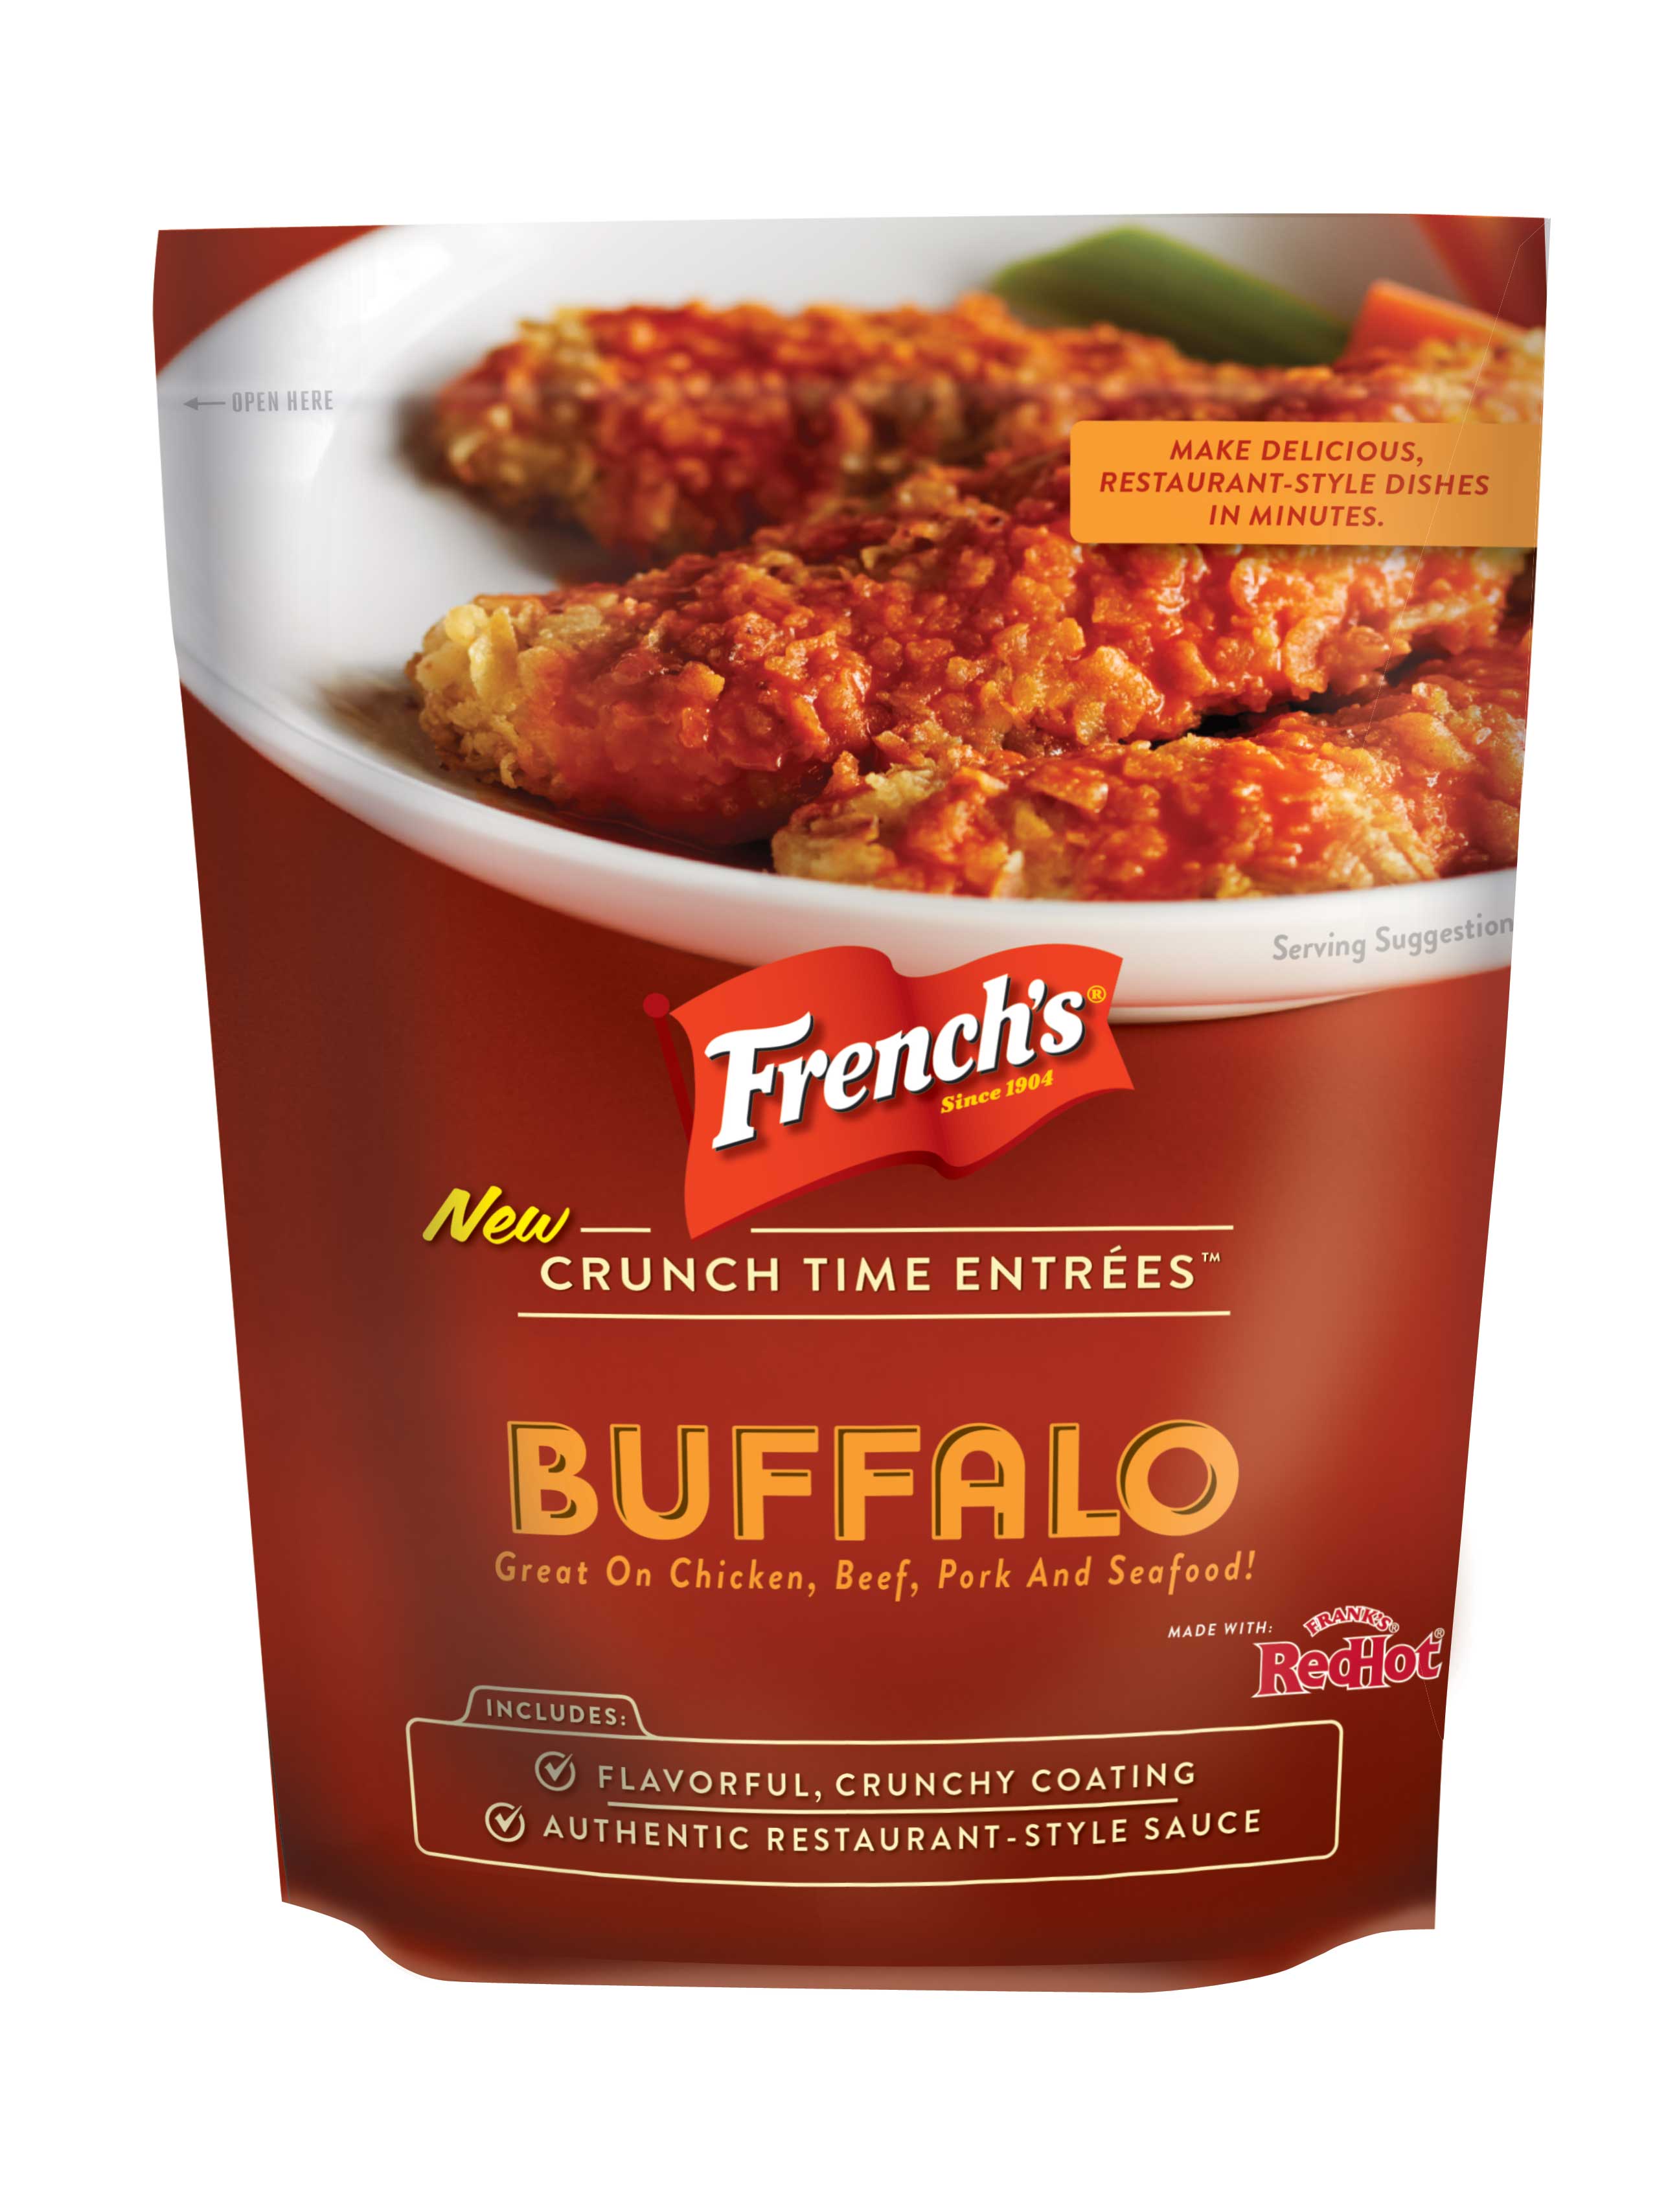 Make Dinner Quickly with NEW French’s Crunch Time Entrées {Giveaway}